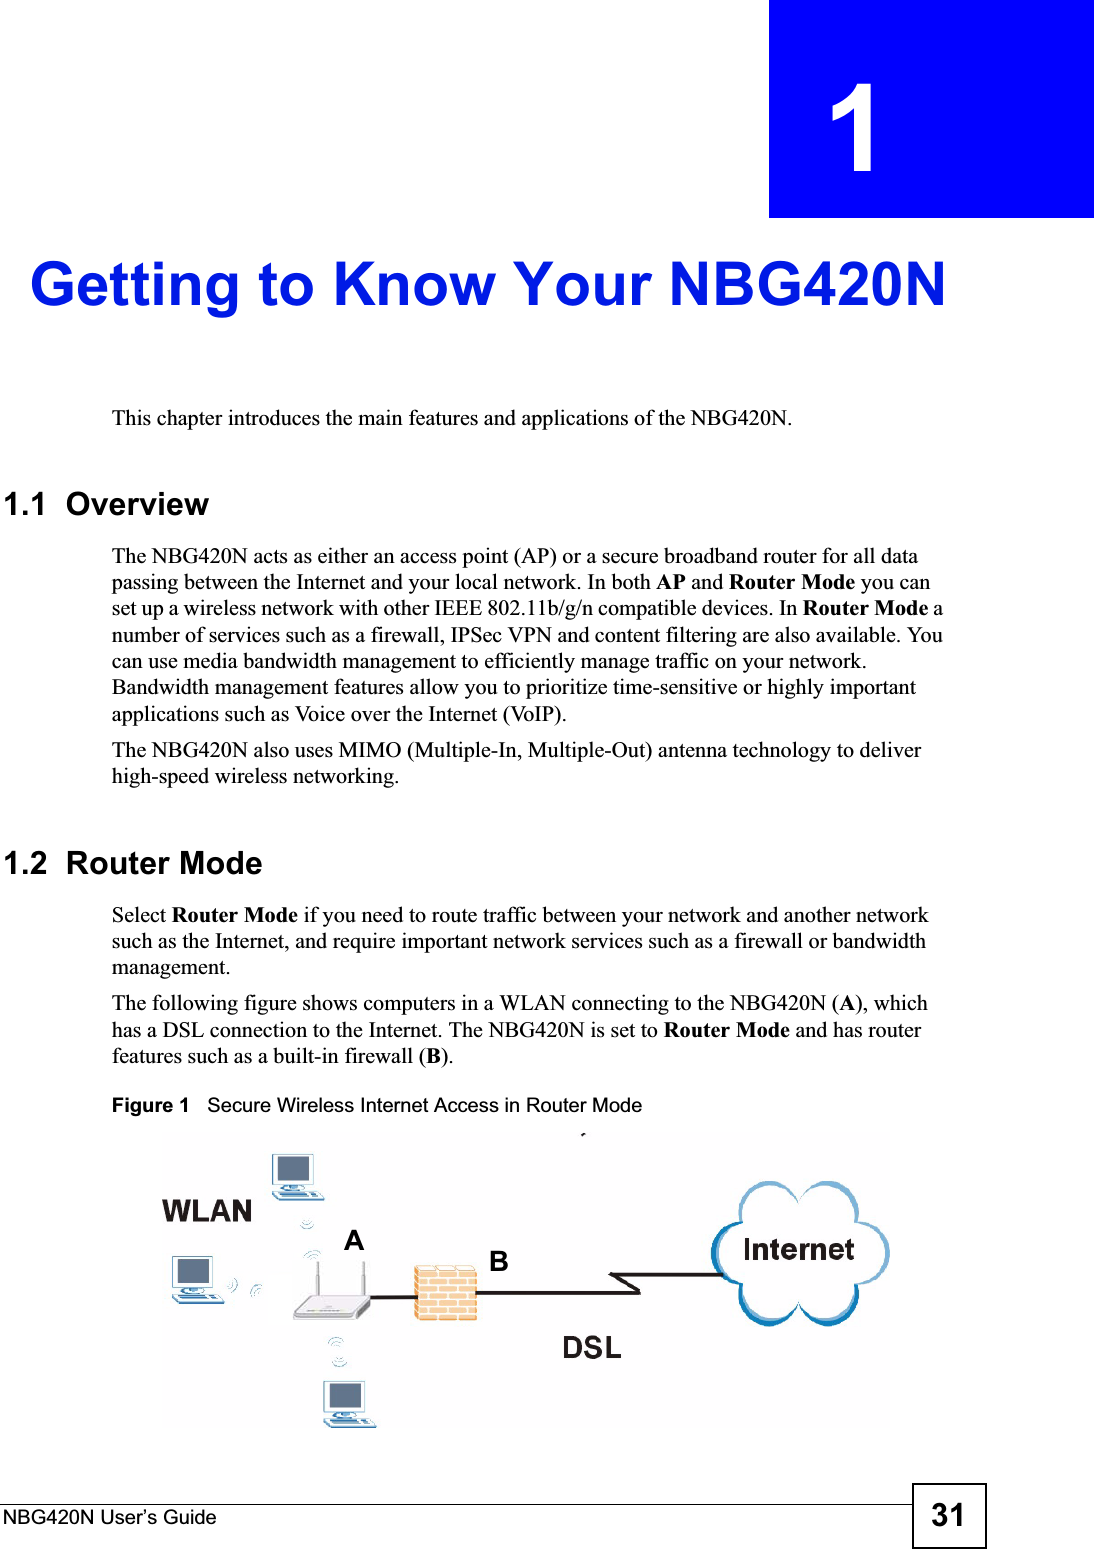 NBG420N User’s Guide 31CHAPTER  1 Getting to Know Your NBG420NThis chapter introduces the main features and applications of the NBG420N.1.1  OverviewThe NBG420N acts as either an access point (AP) or a secure broadband router for all data passing between the Internet and your local network. In both AP and Router Mode you can set up a wireless network with other IEEE 802.11b/g/n compatible devices. In Router Mode a number of services such as a firewall, IPSec VPN and content filtering are also available. You can use media bandwidth management to efficiently manage traffic on your network. Bandwidth management features allow you to prioritize time-sensitive or highly important applications such as Voice over the Internet (VoIP).The NBG420N also uses MIMO (Multiple-In, Multiple-Out) antenna technology to deliver high-speed wireless networking.1.2  Router ModeSelect Router Mode if you need to route traffic between your network and another network such as the Internet, and require important network services such as a firewall or bandwidth management. The following figure shows computers in a WLAN connecting to the NBG420N (A), which has a DSL connection to the Internet. The NBG420N is set to Router Mode and has router features such as a built-in firewall (B).Figure 1   Secure Wireless Internet Access in Router Mode AB